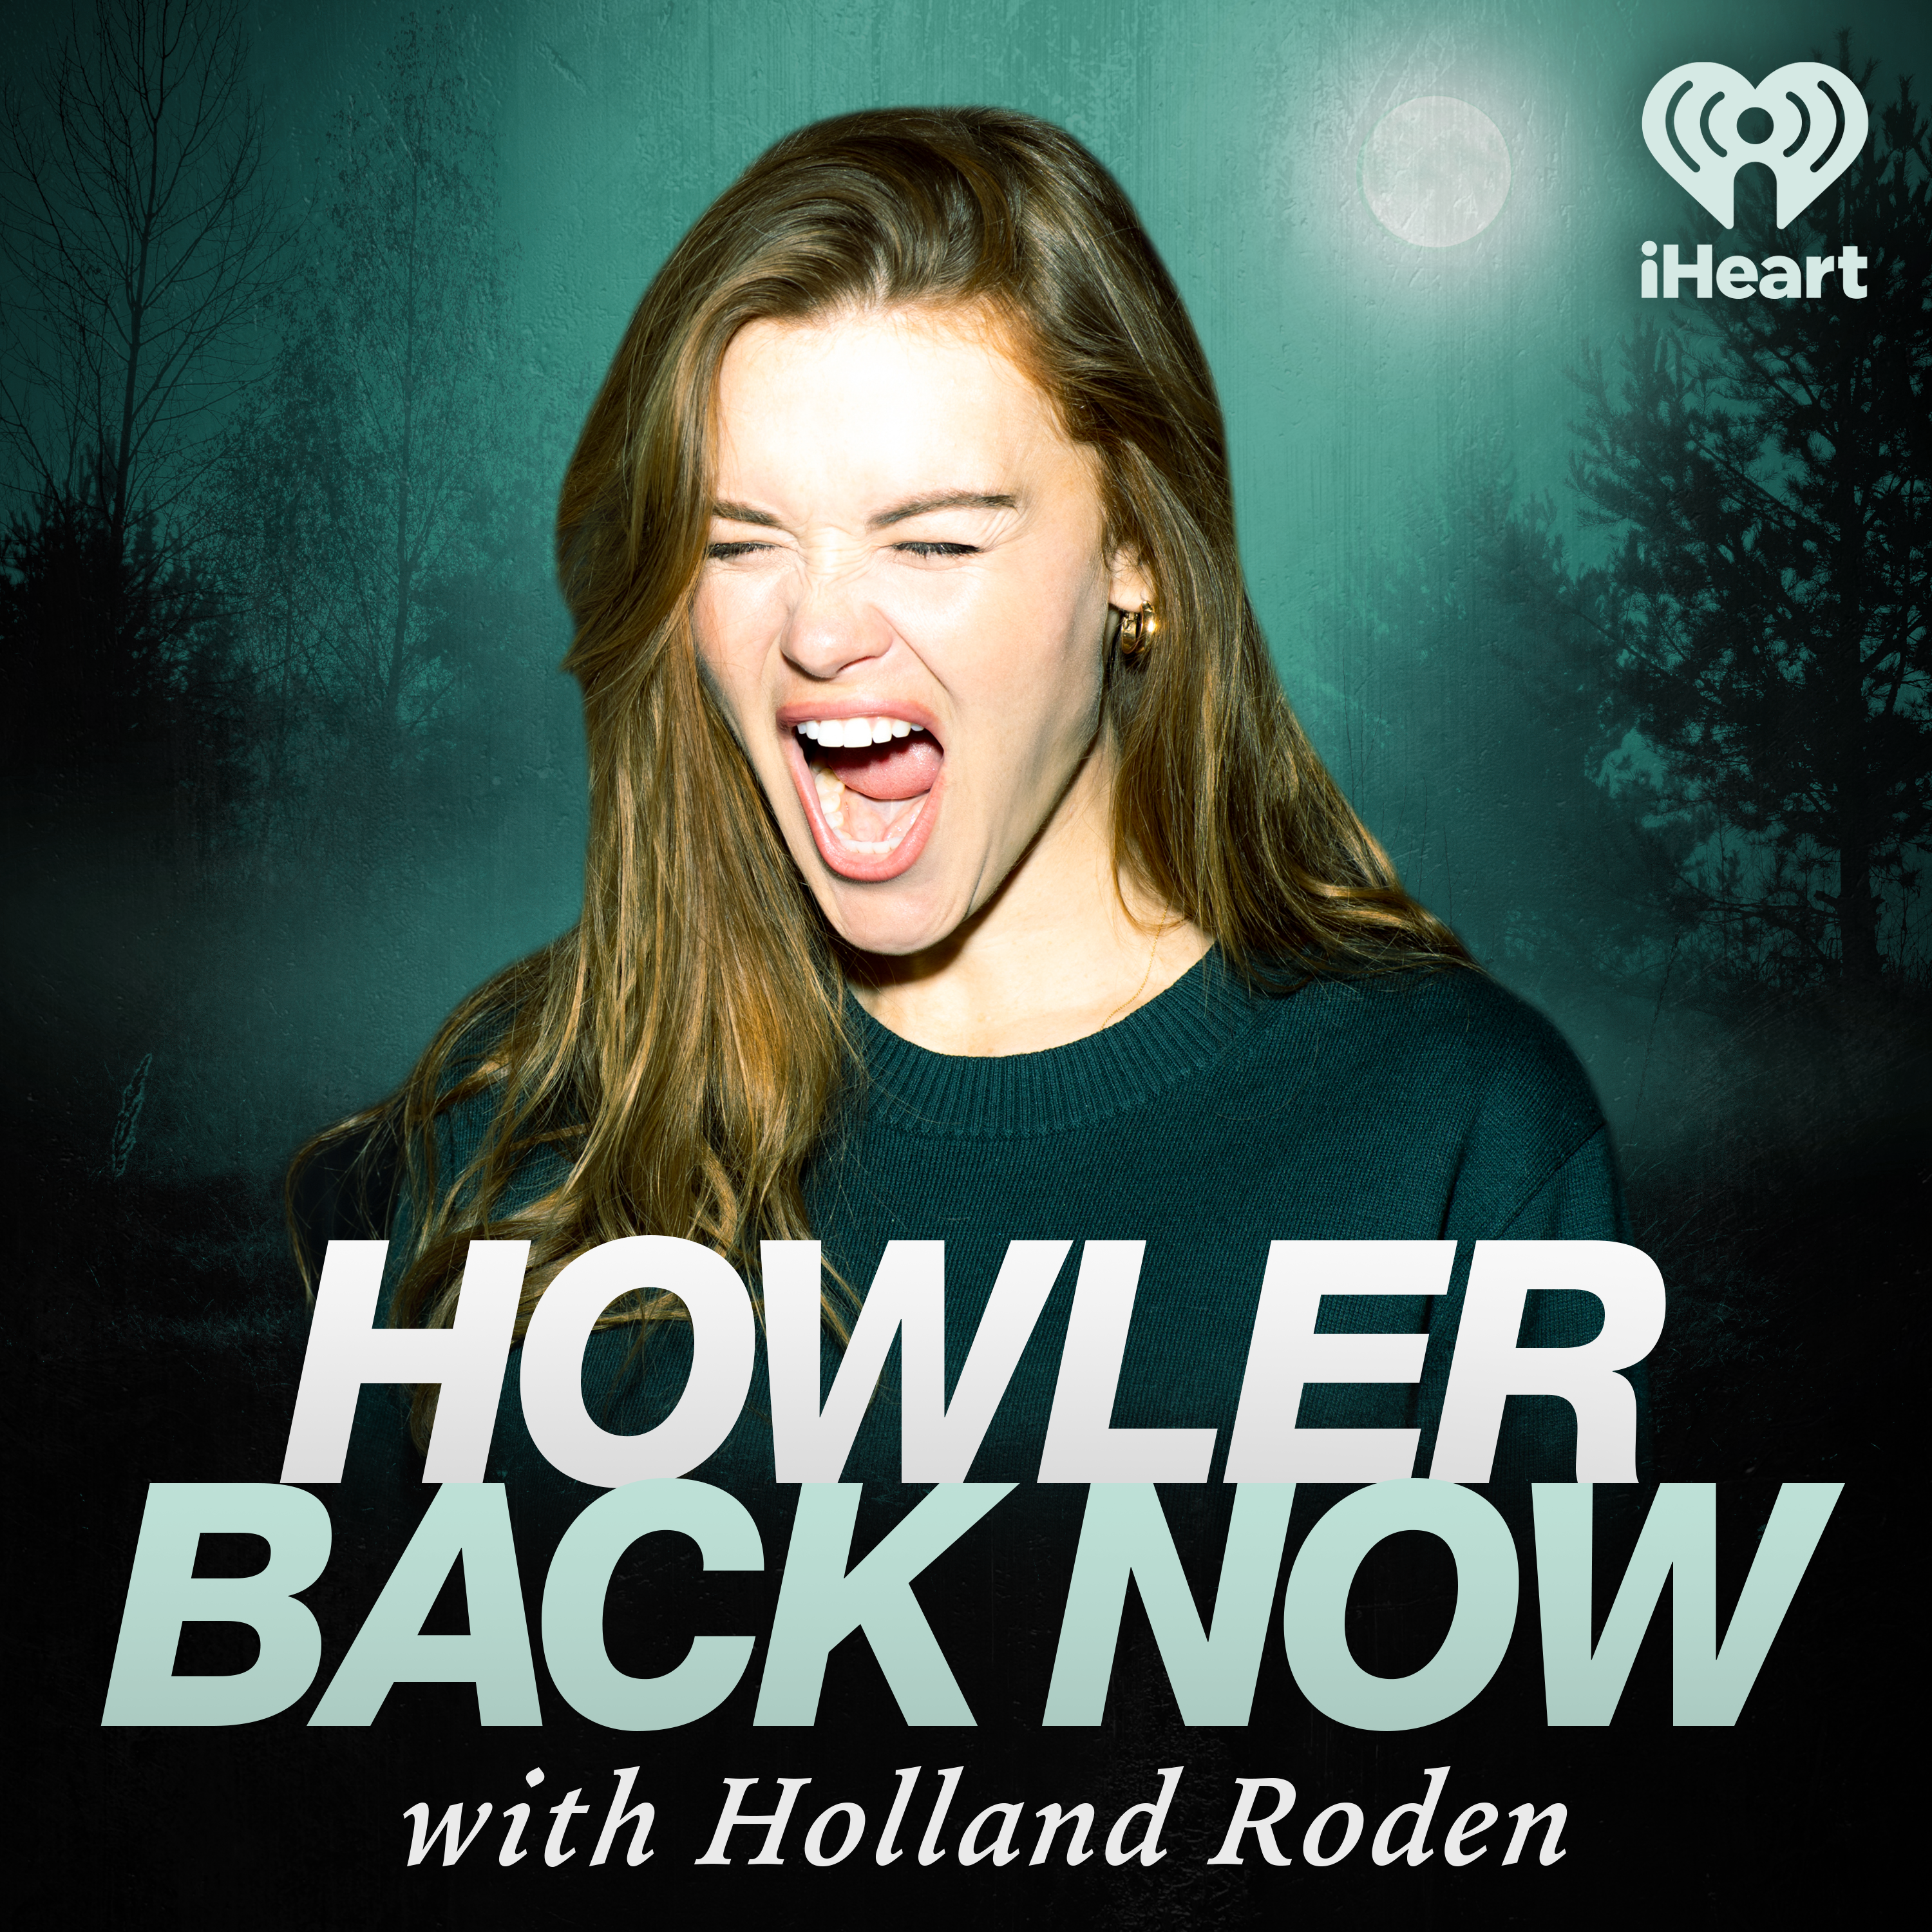 Introducing: Howler Back Now with Holland Roden